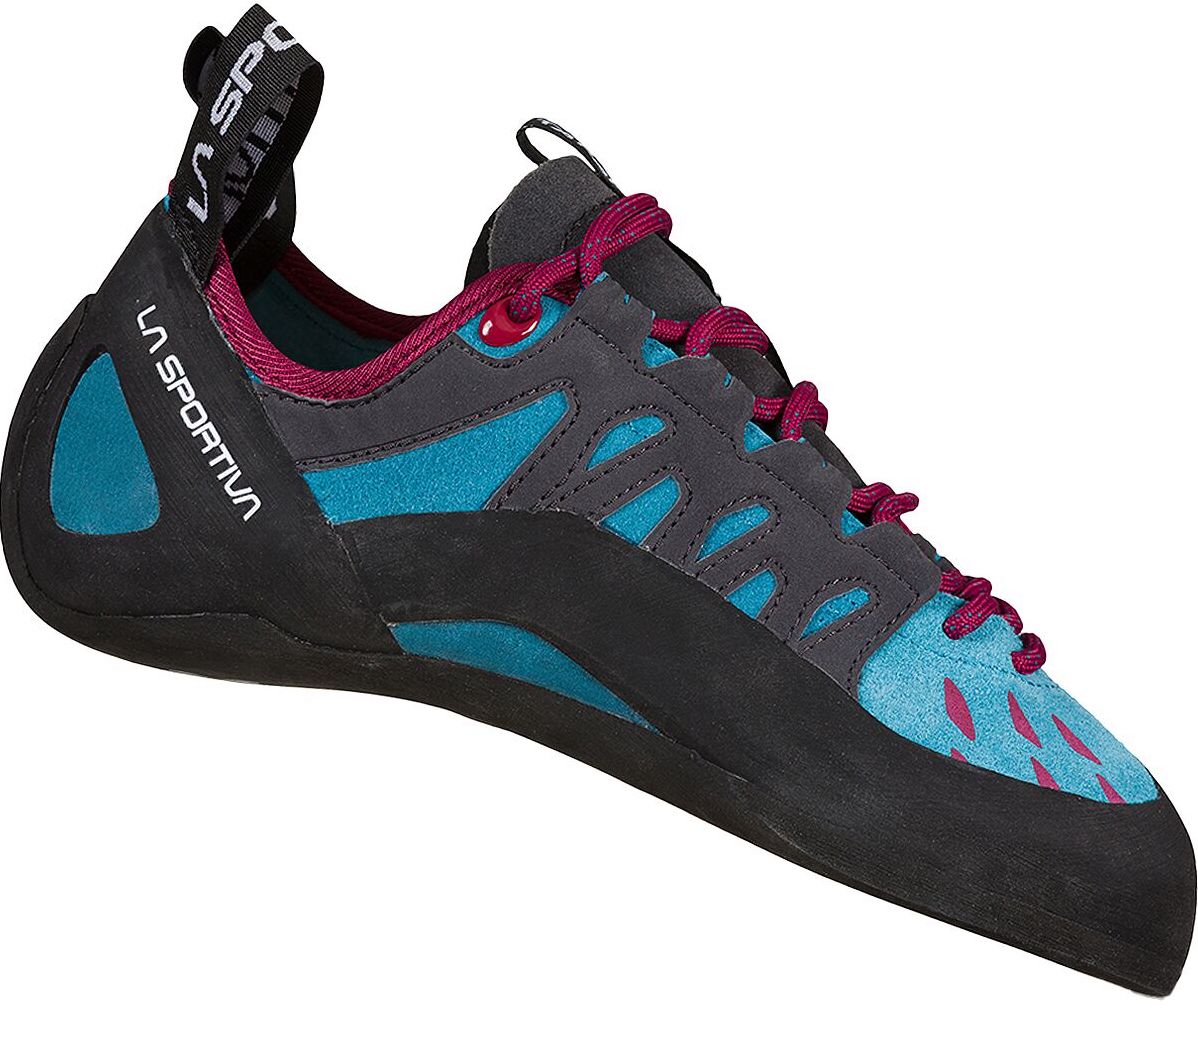 What Size Climbing Shoe Should I Wear? Our Complete Size Guide.